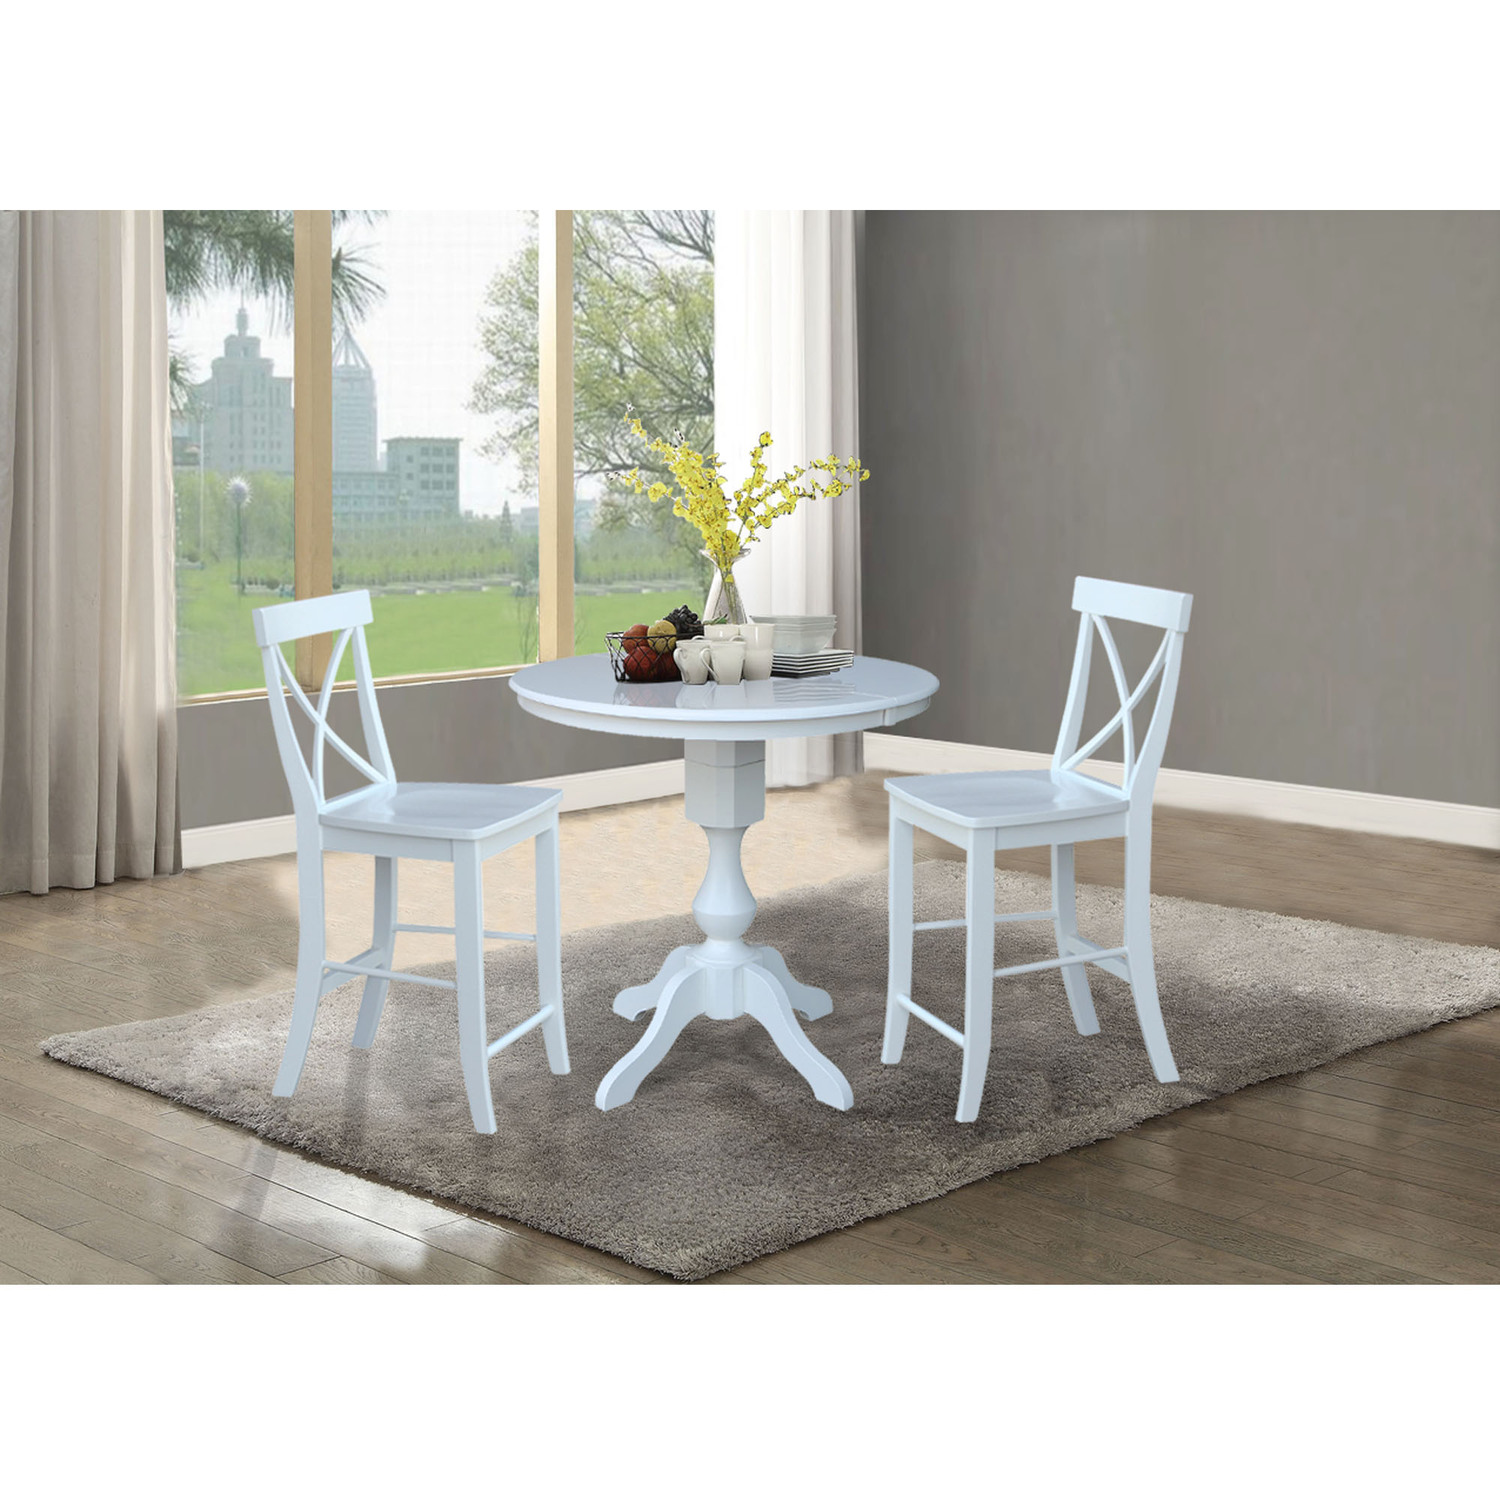 36" Round Counter Height Table with 12" Leaf and 2 X-back Stools – White - 3 Piece Set - image 3 of 3